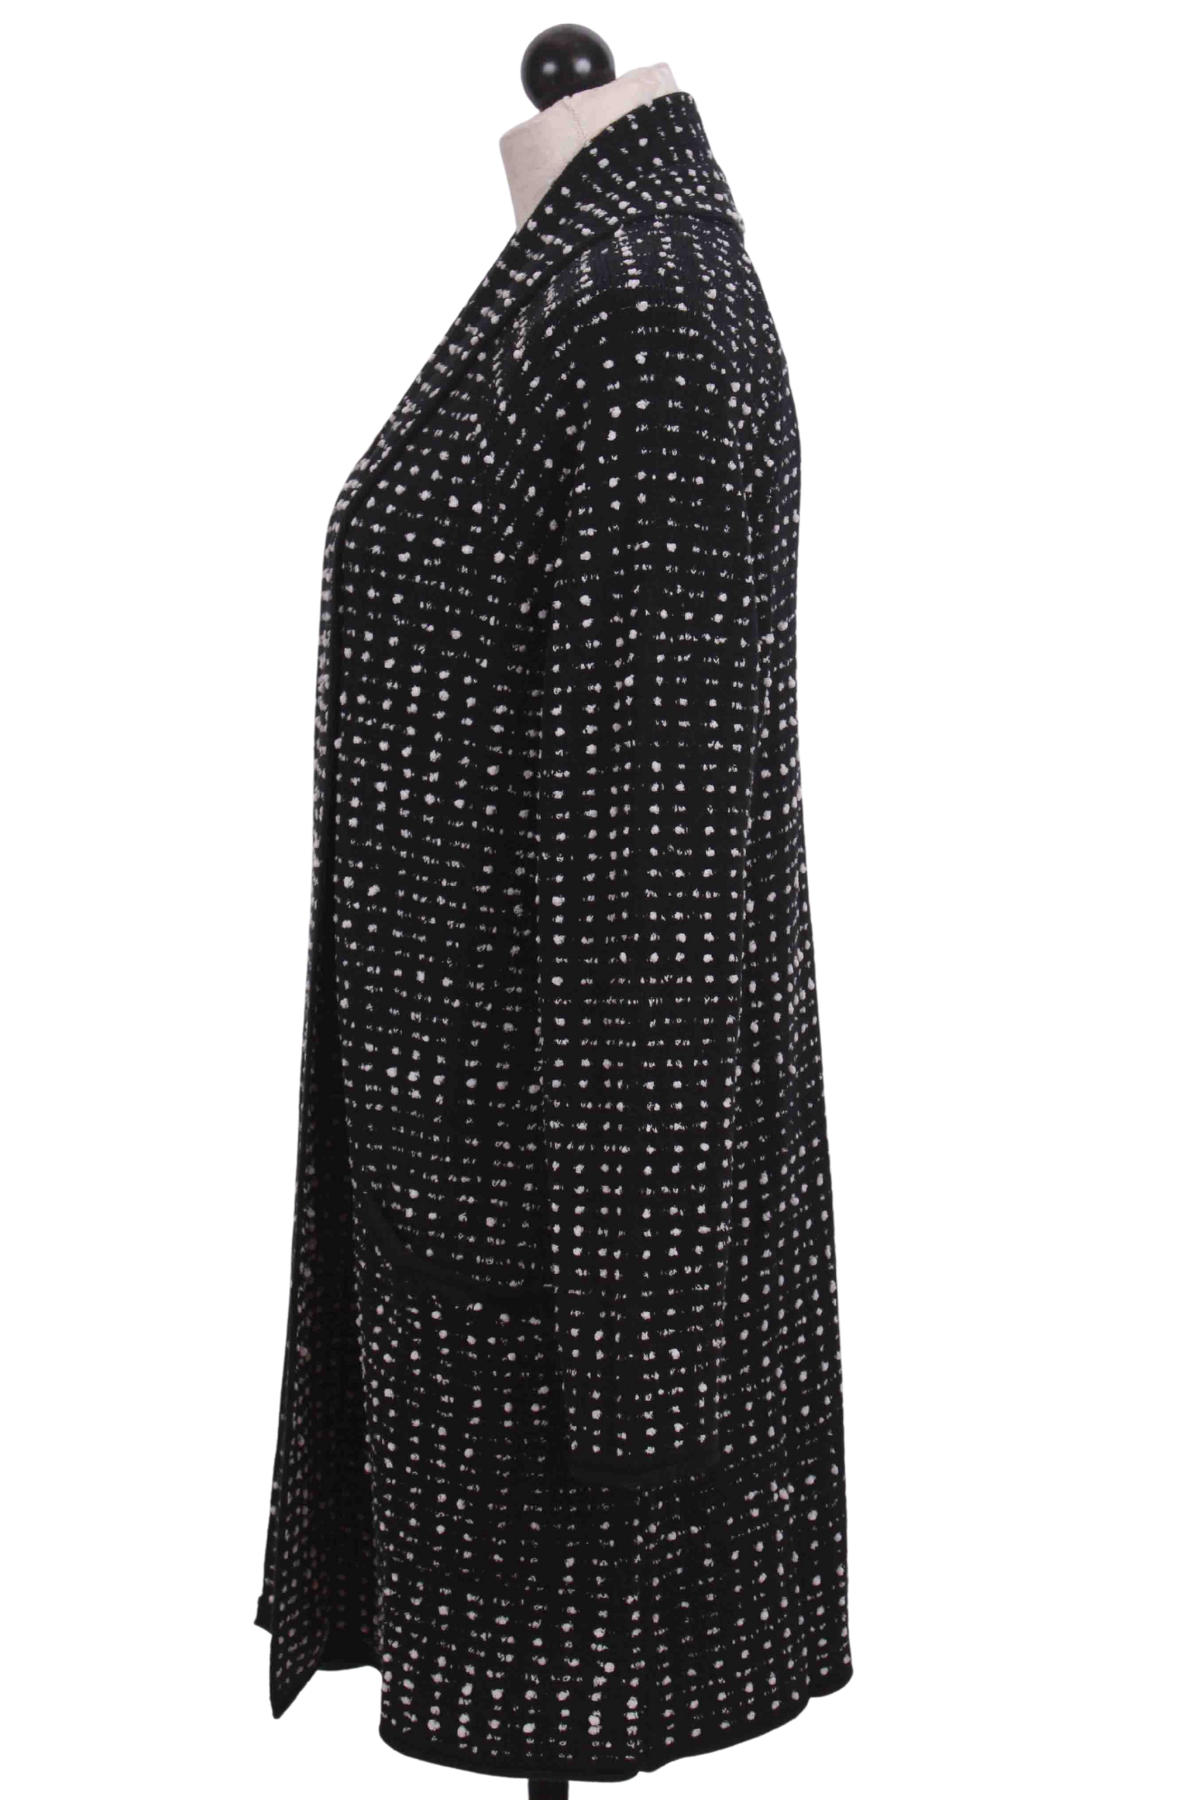 side view of black Textured Dot Shawl Cardigan by Liv by Habitat